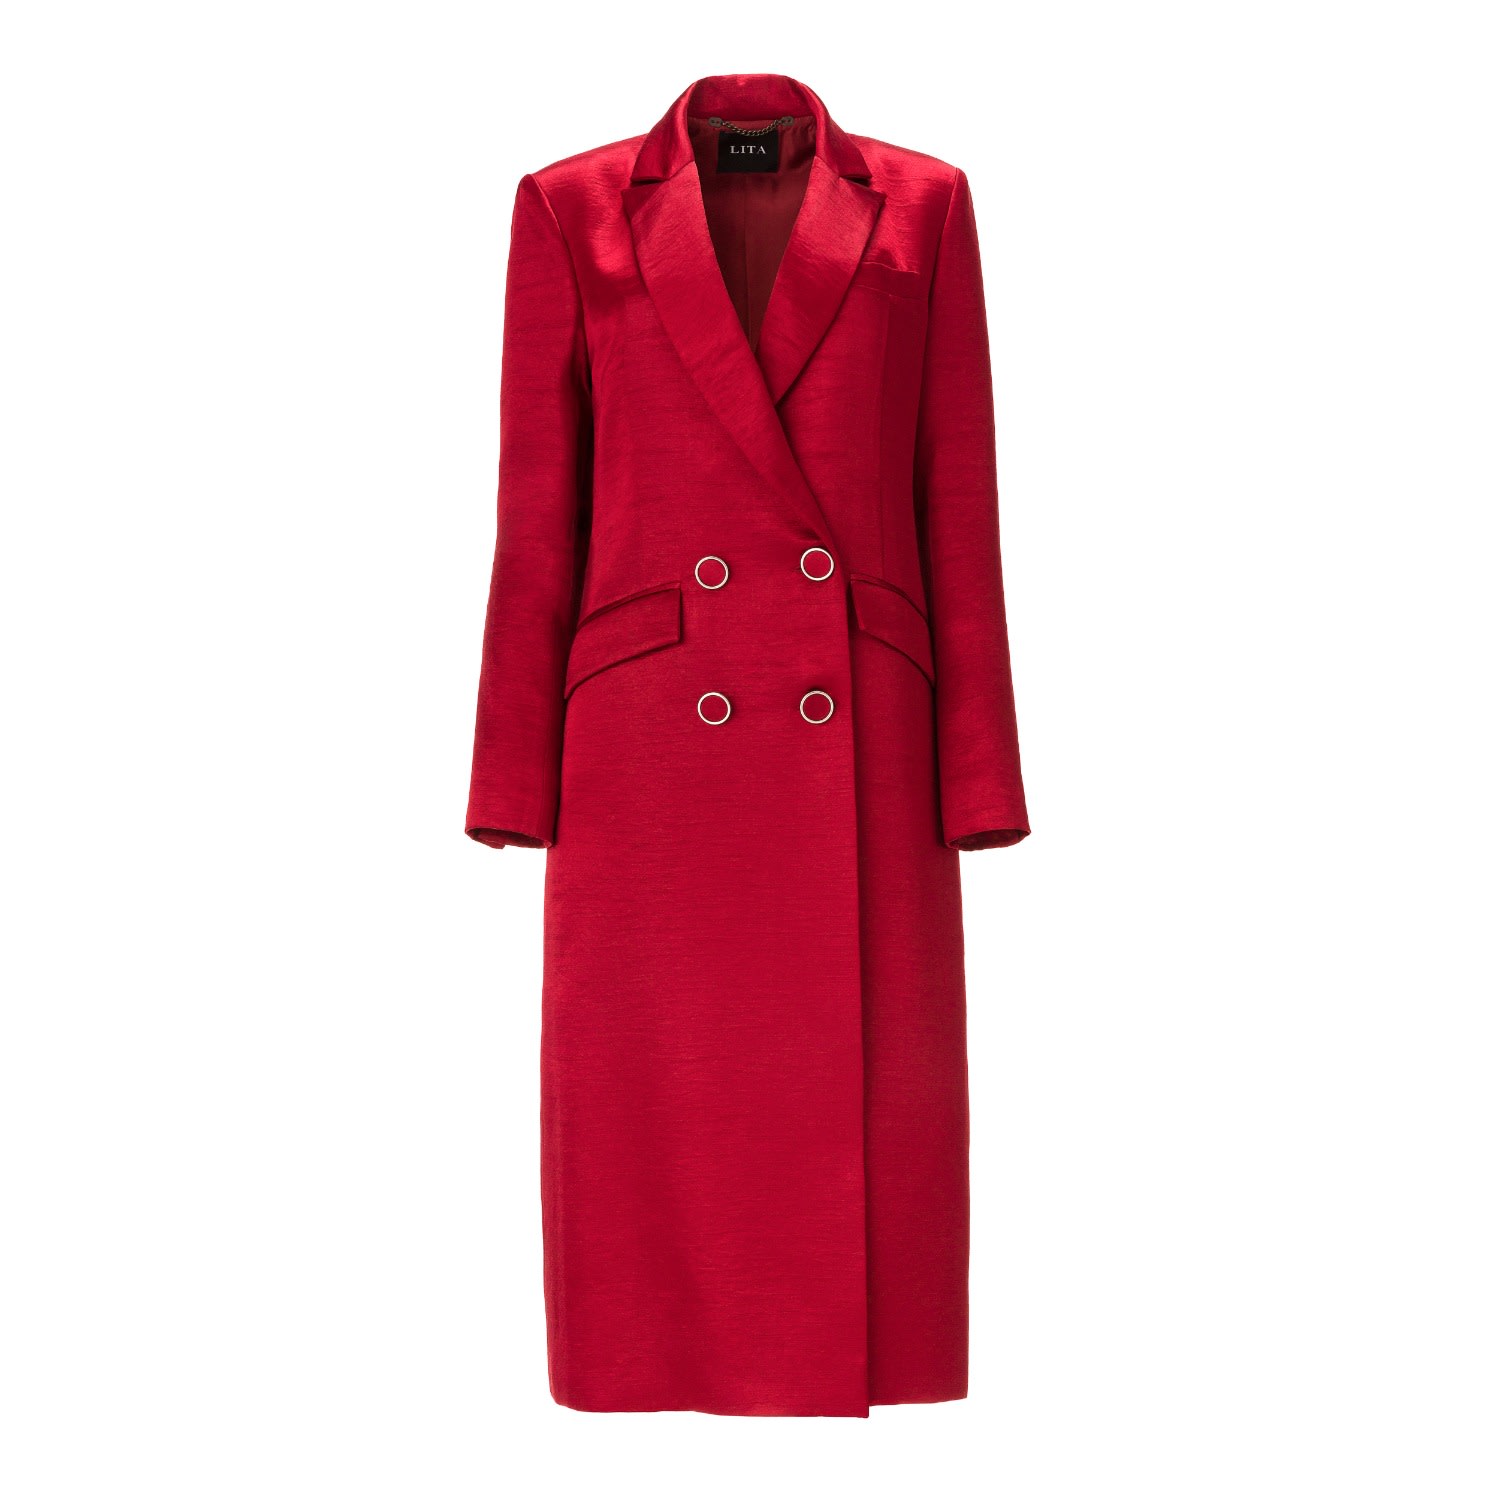 Lita Couture Women's Belted Midi Trench Coat In Red Satin Blend